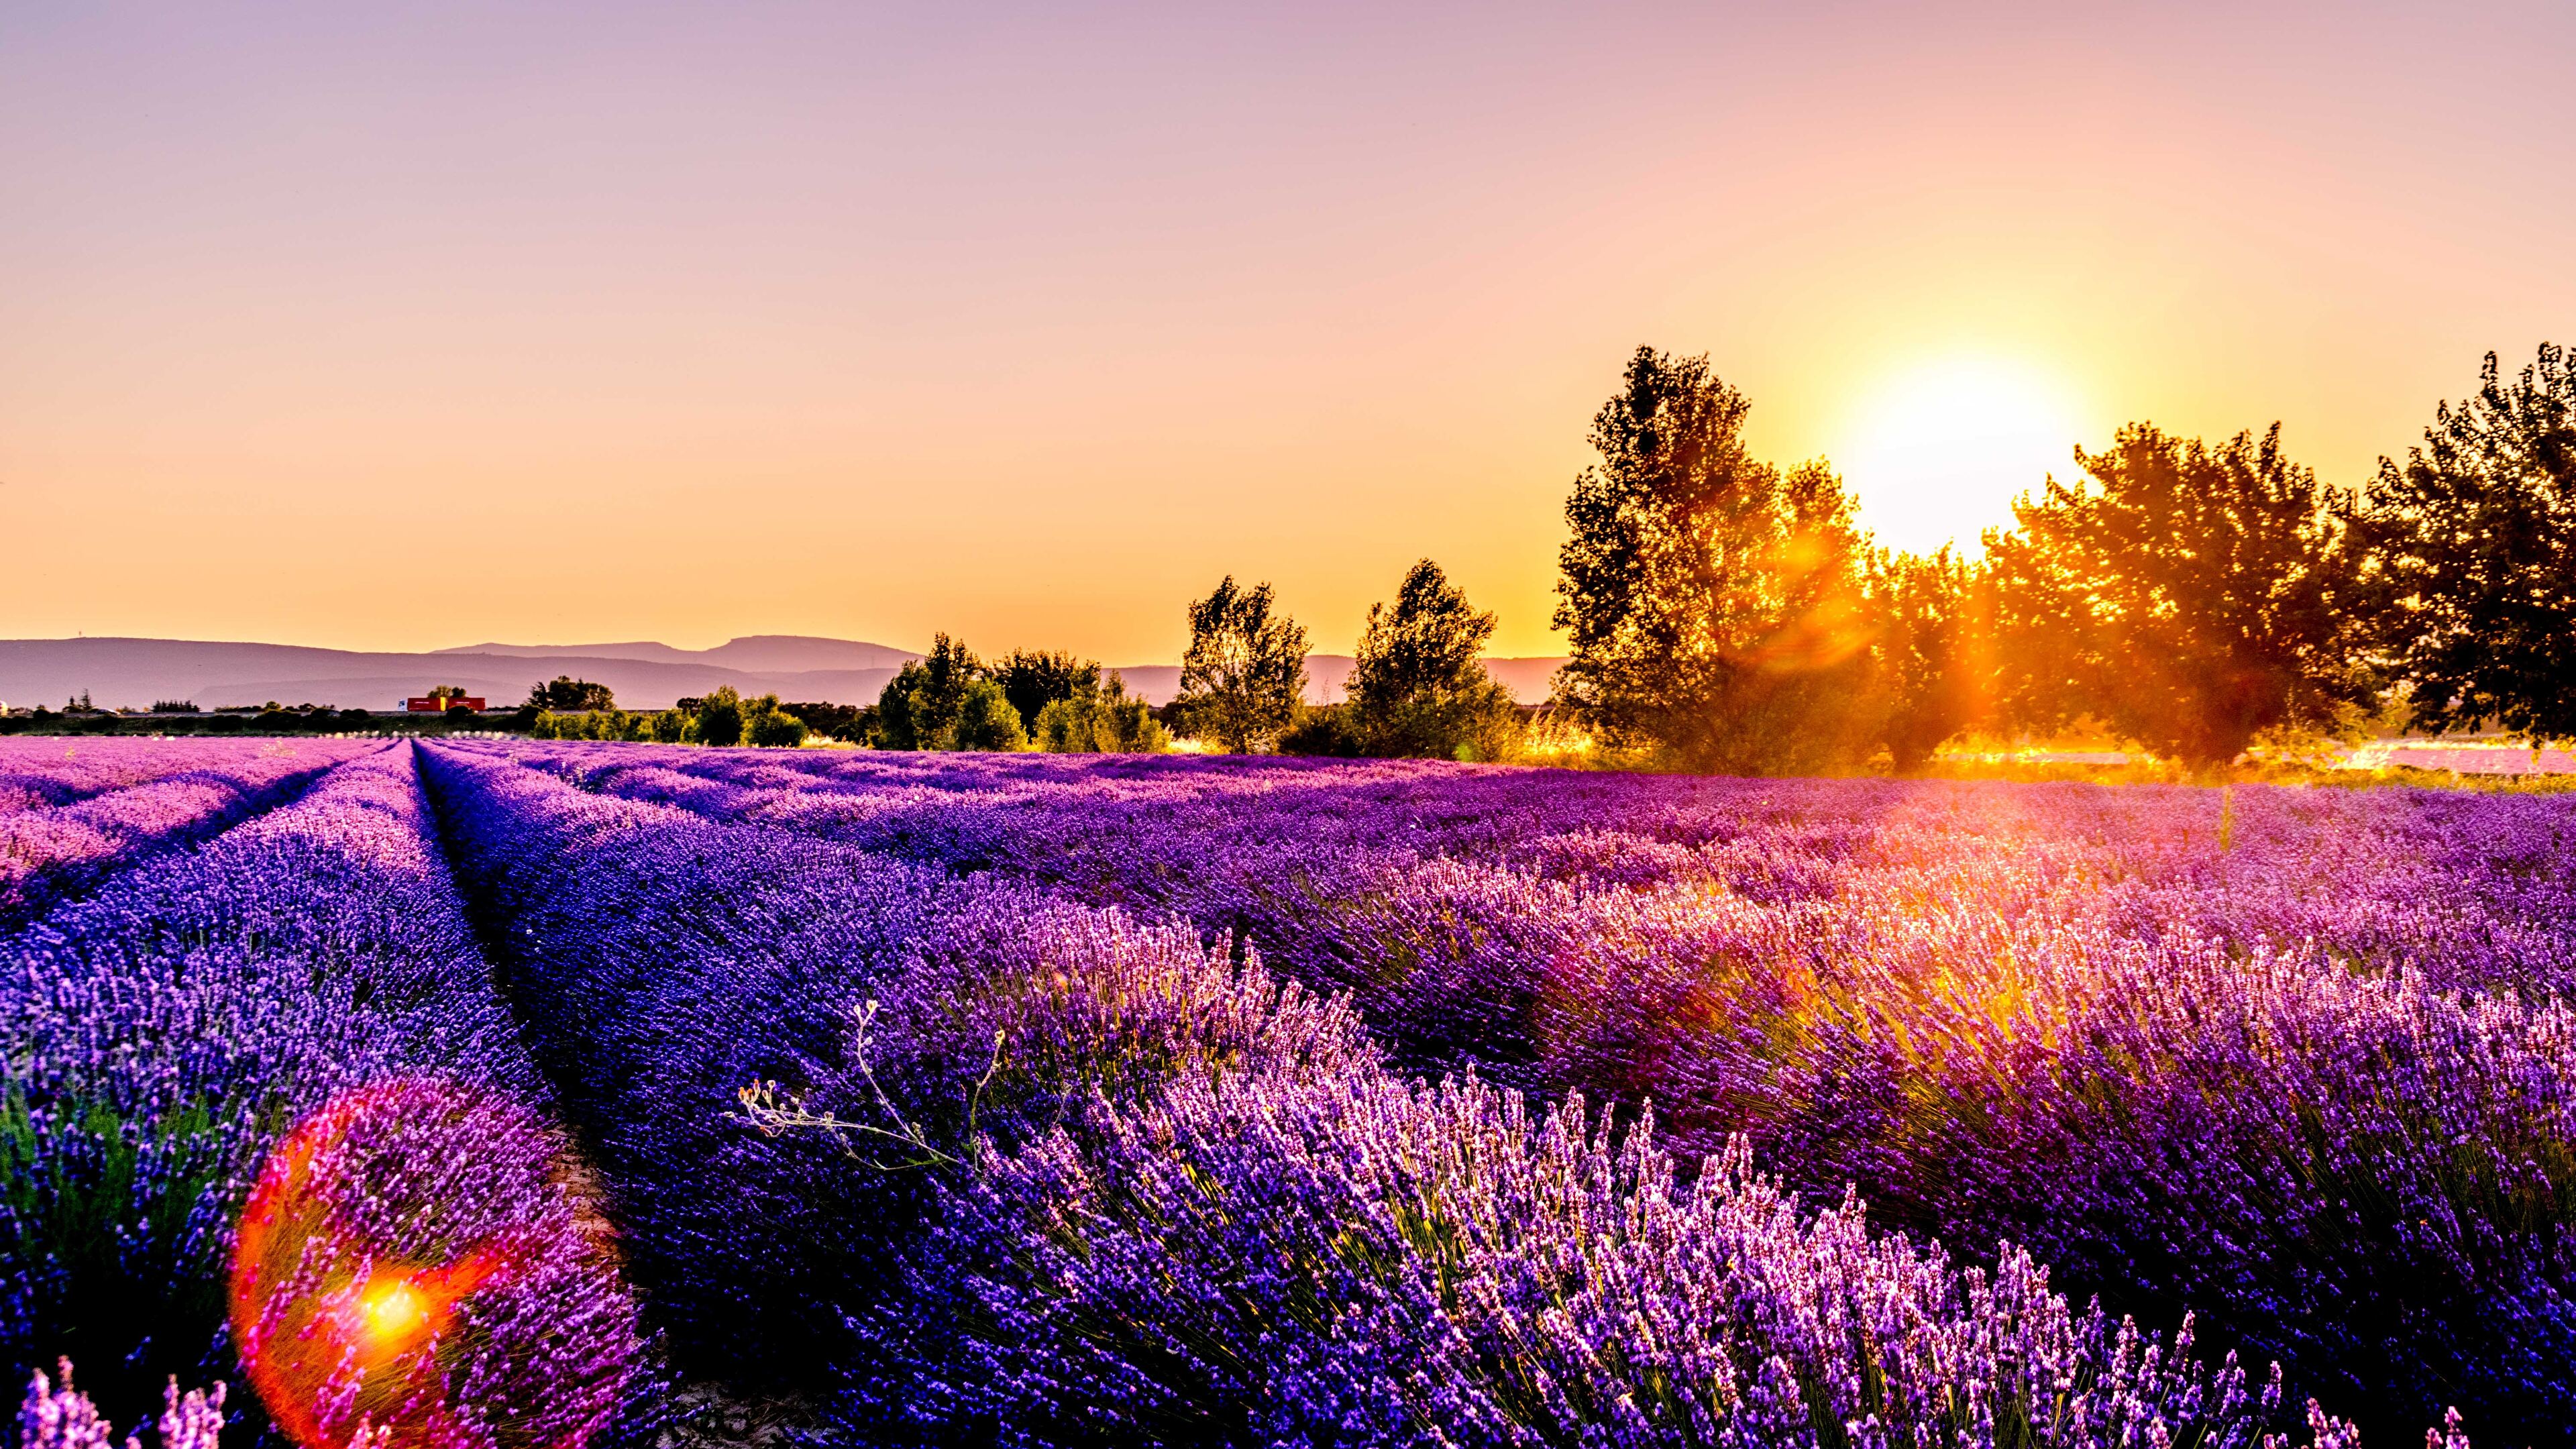 Lavender 4K wallpaper for your desktop or mobile screen free and easy to download